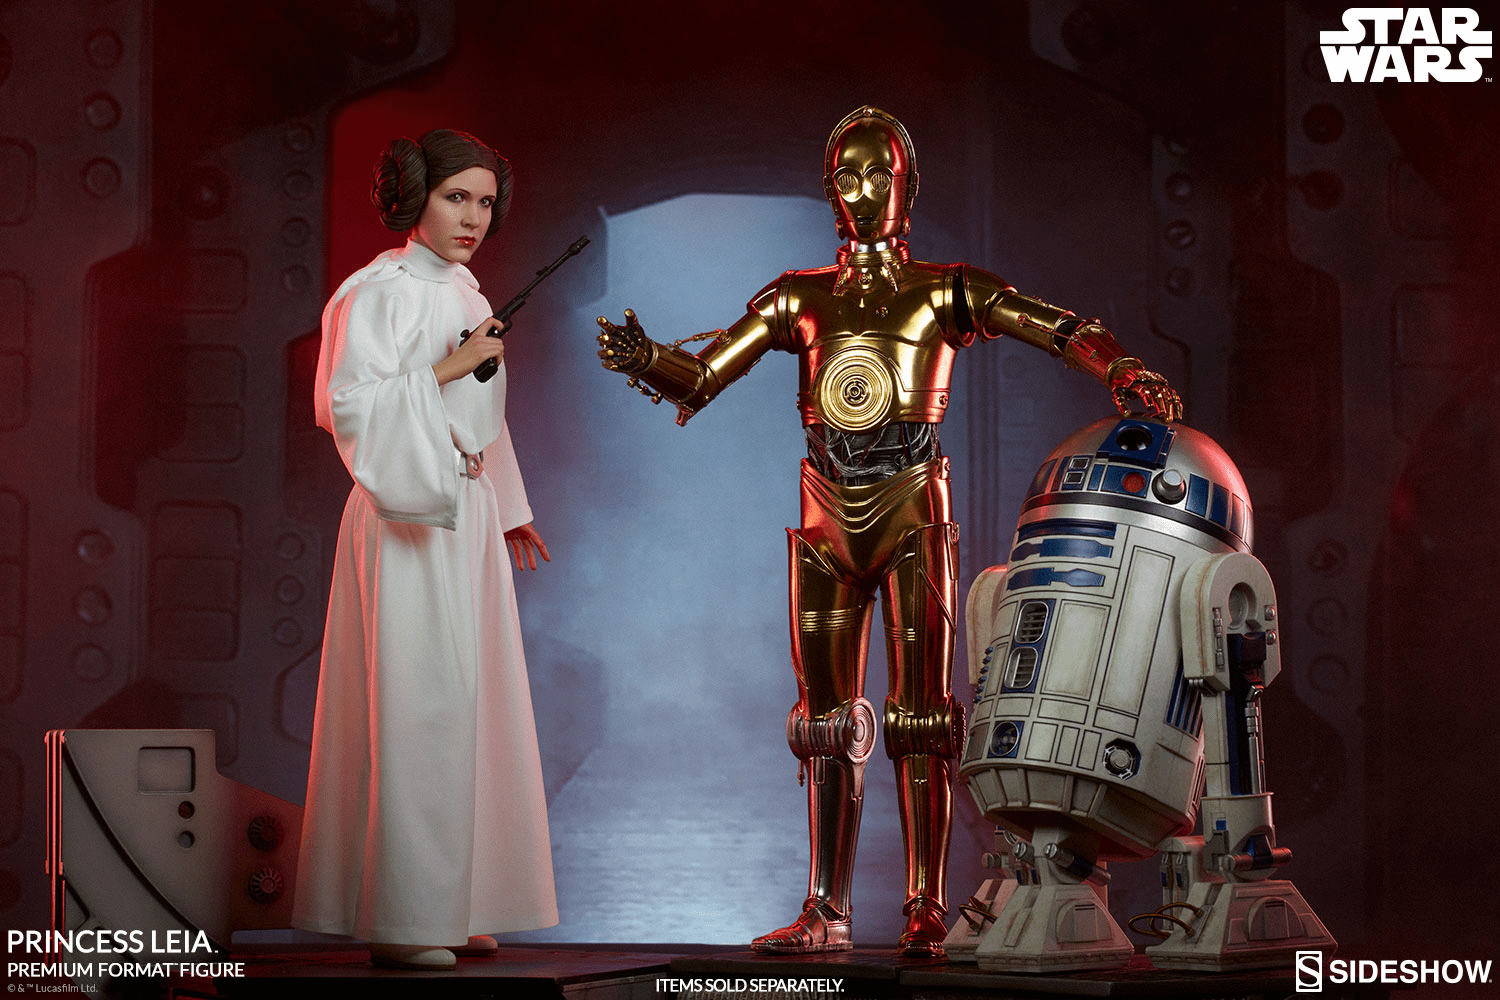 An Exclusive Look At Sideshow’s Stunning New Princess Leia Figure